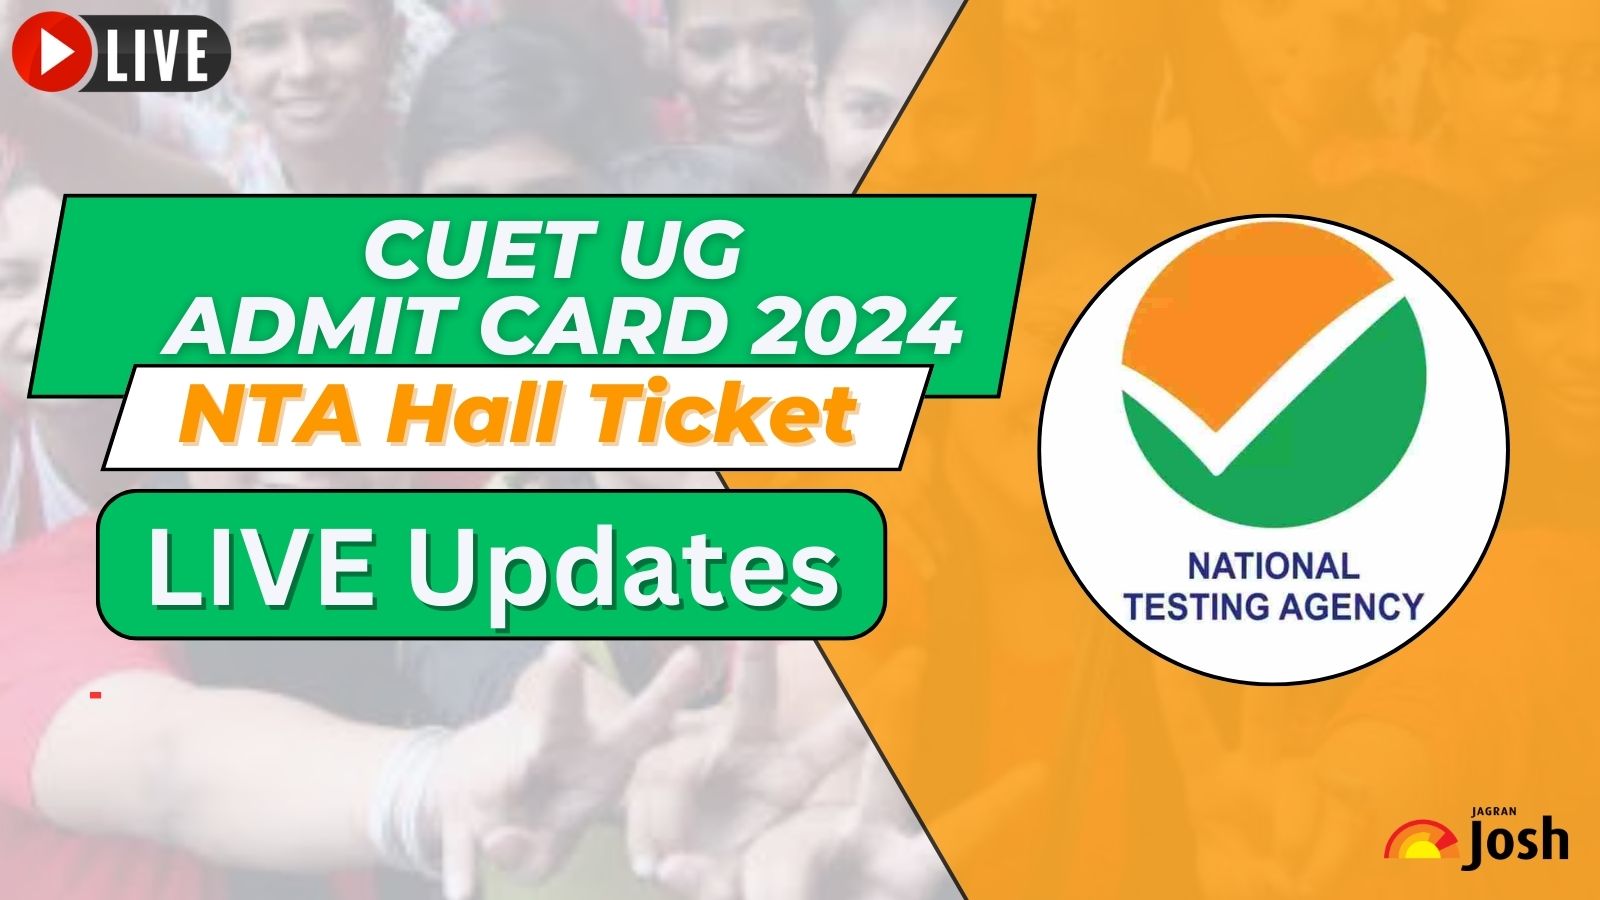 [LIVE] CUET UG Admit Card 2024 Date: Official Website Links to Check and Download NTA CUET Hall Ticket at cuetug.ntaonline.in, Get Latest Updates